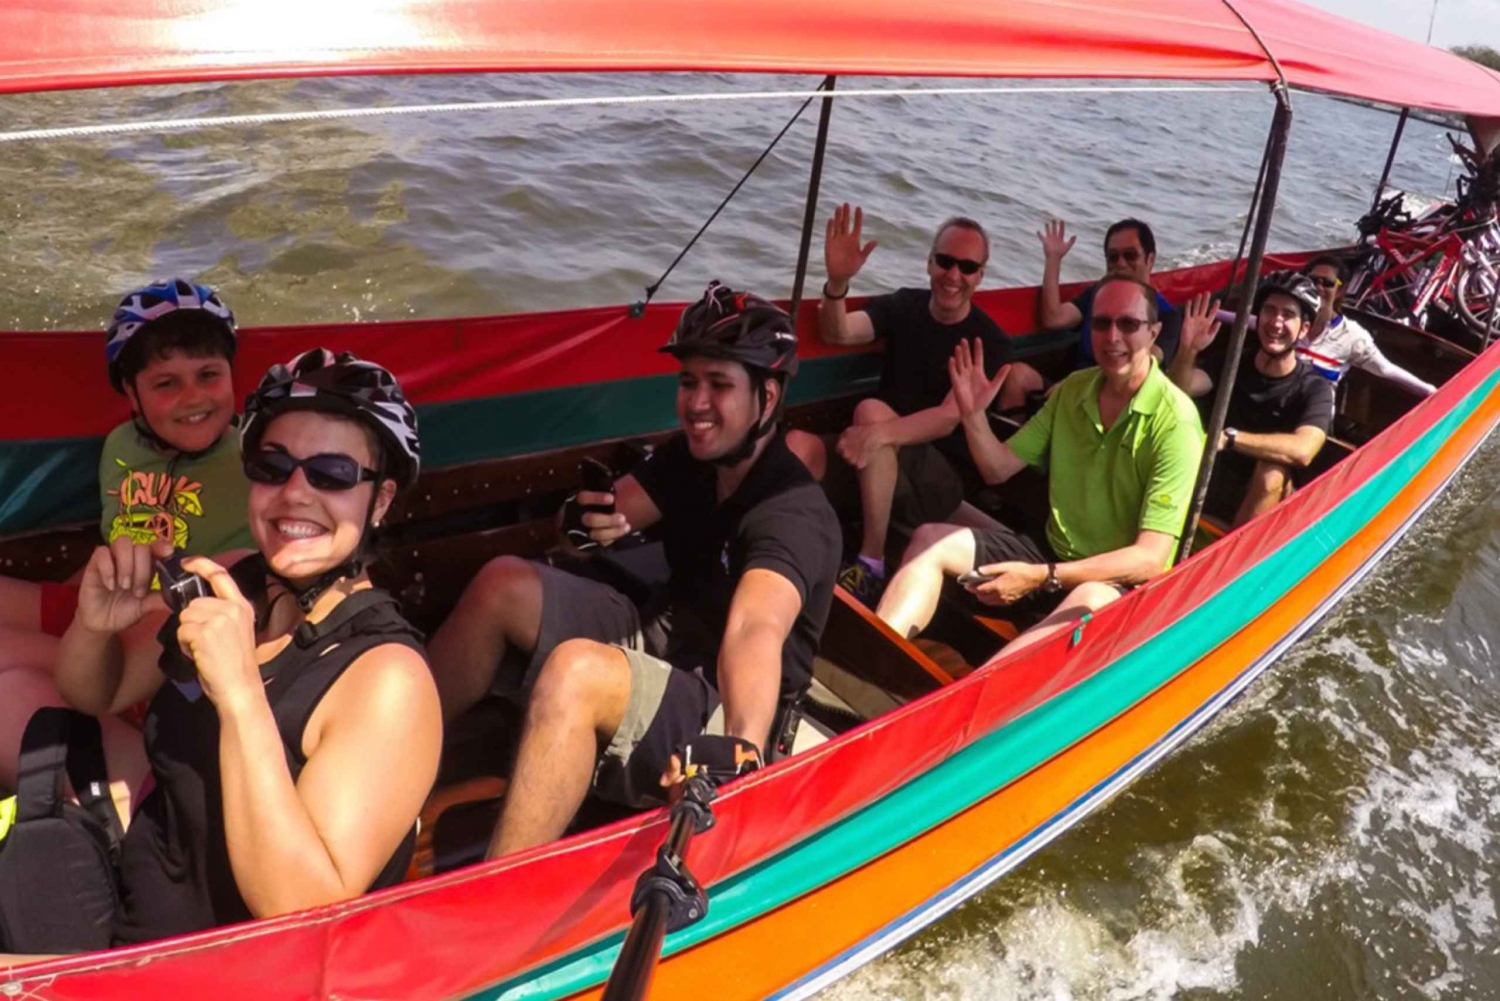 Bangkok’s Past with Local Taste Tour by Bike & Boat